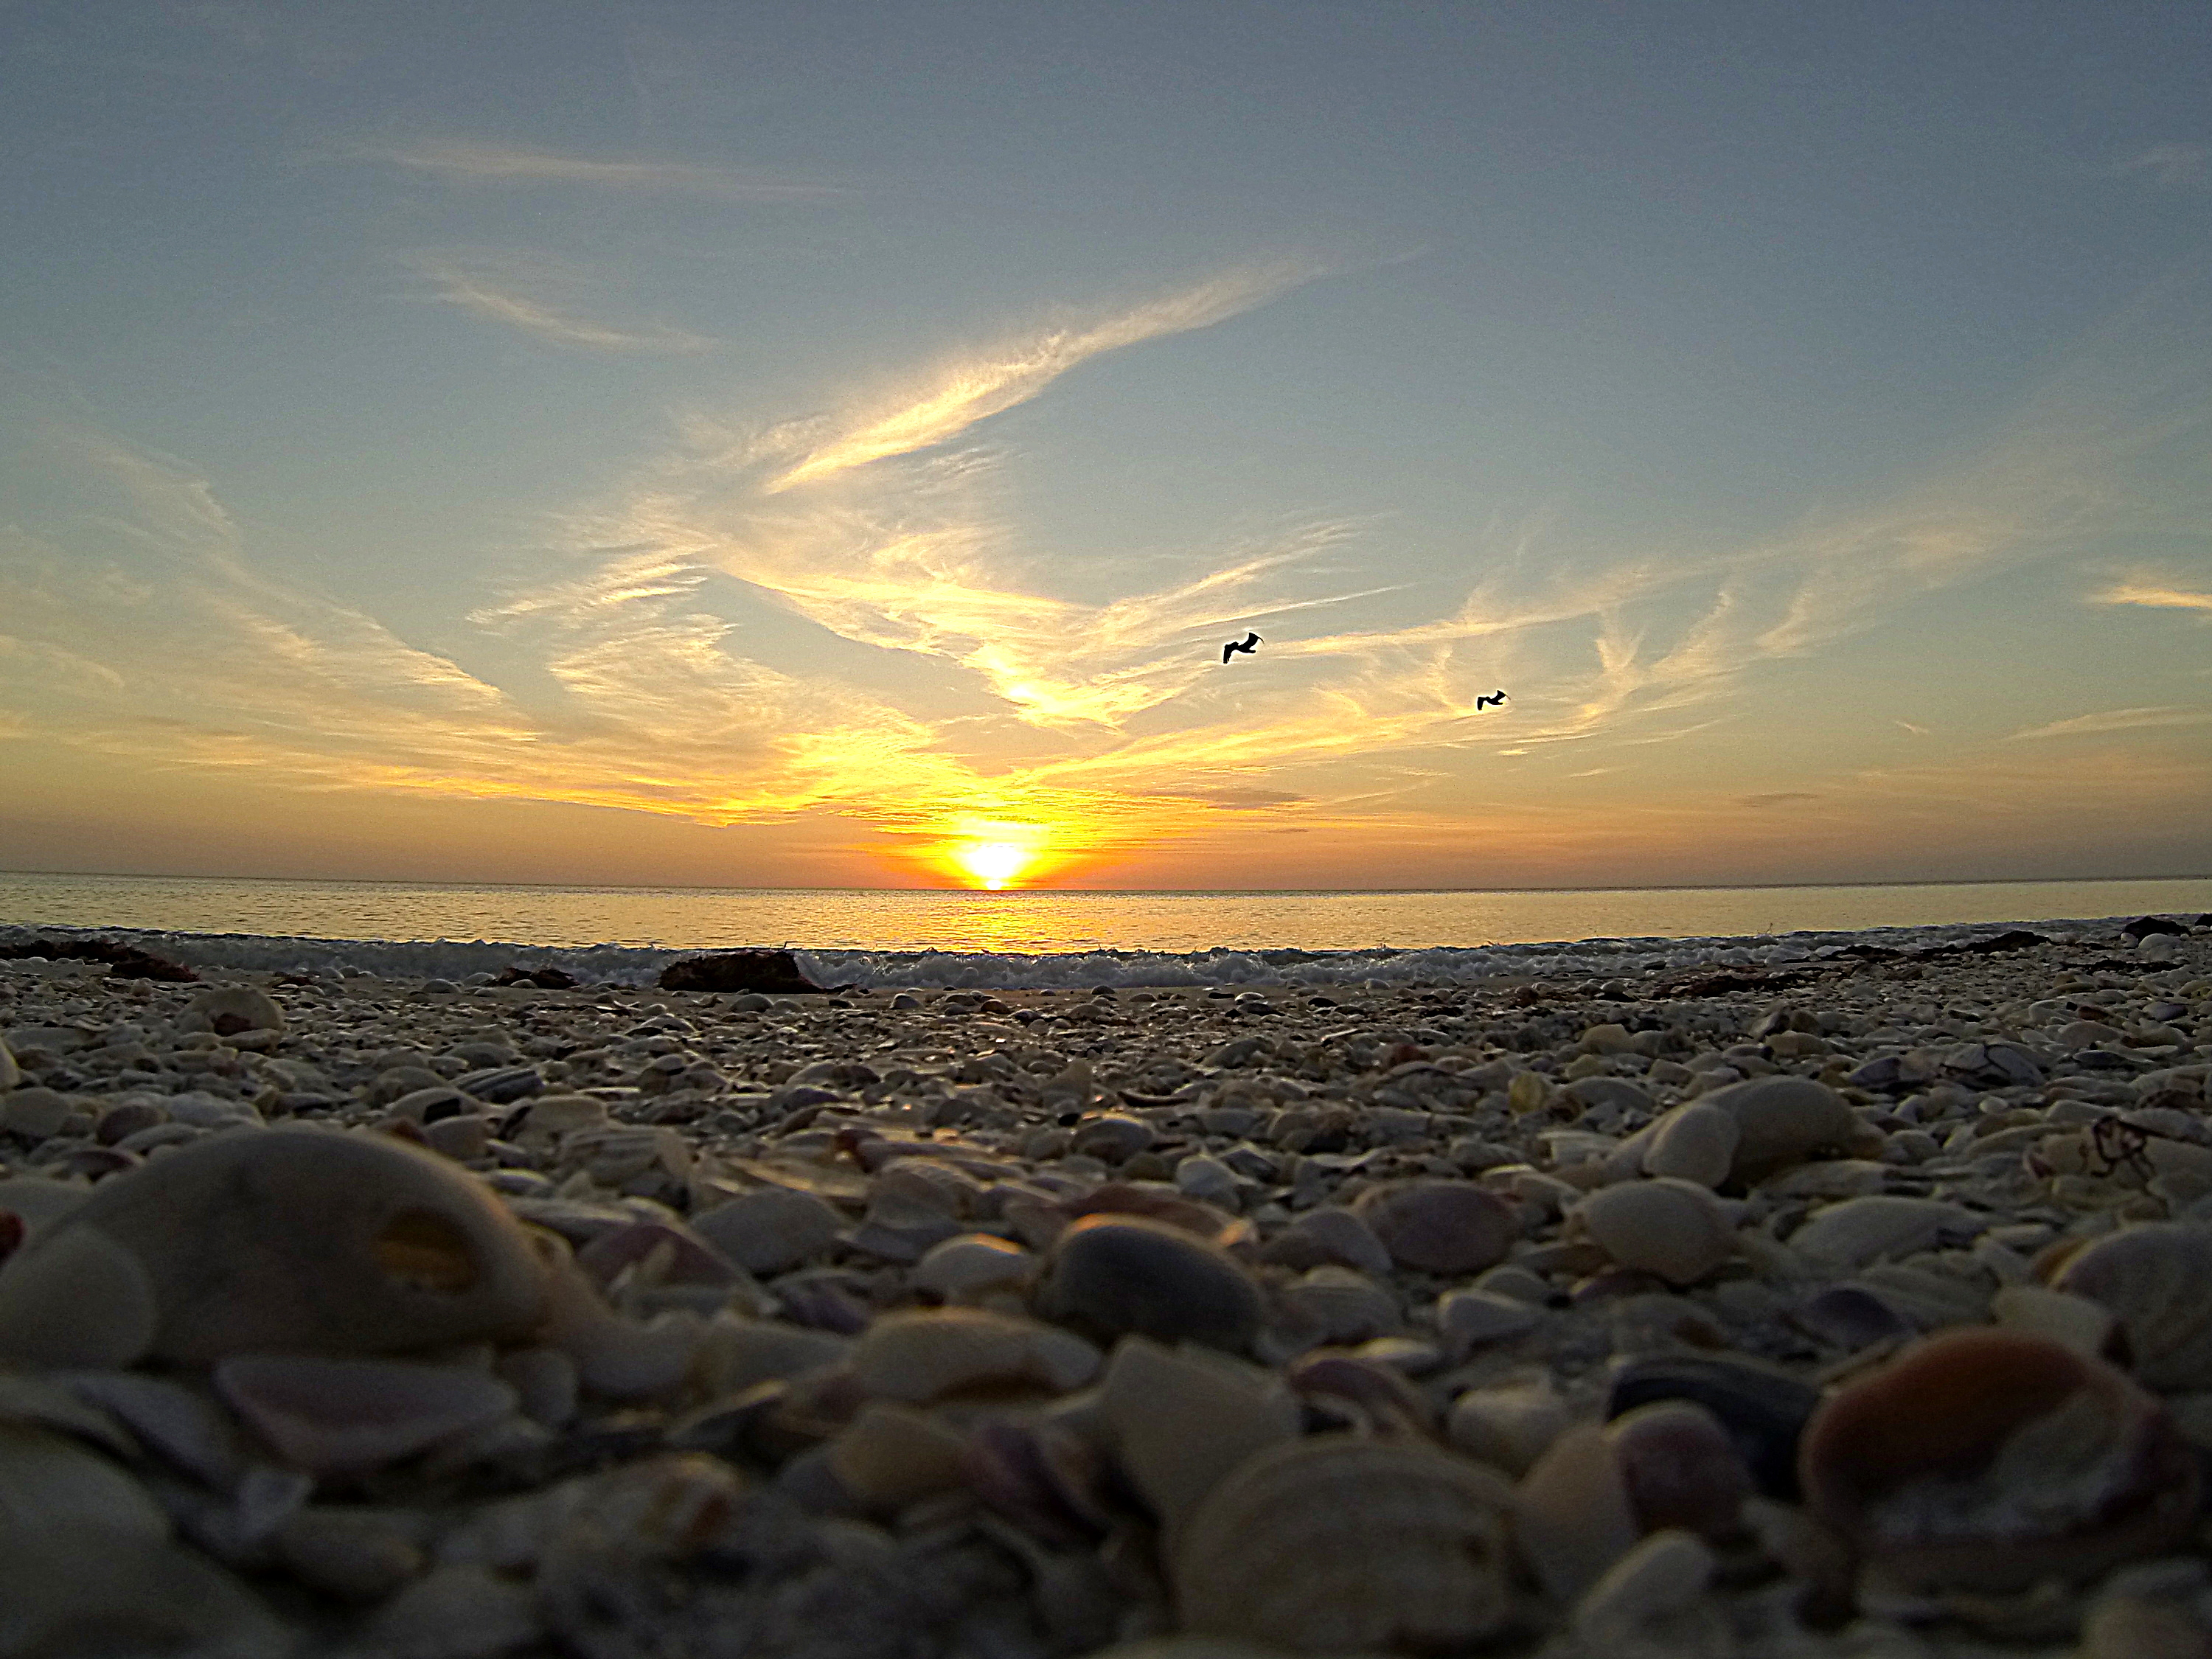 the sun goes down on a Florida beach with seas shells on the sand and pelicans flying in the sky